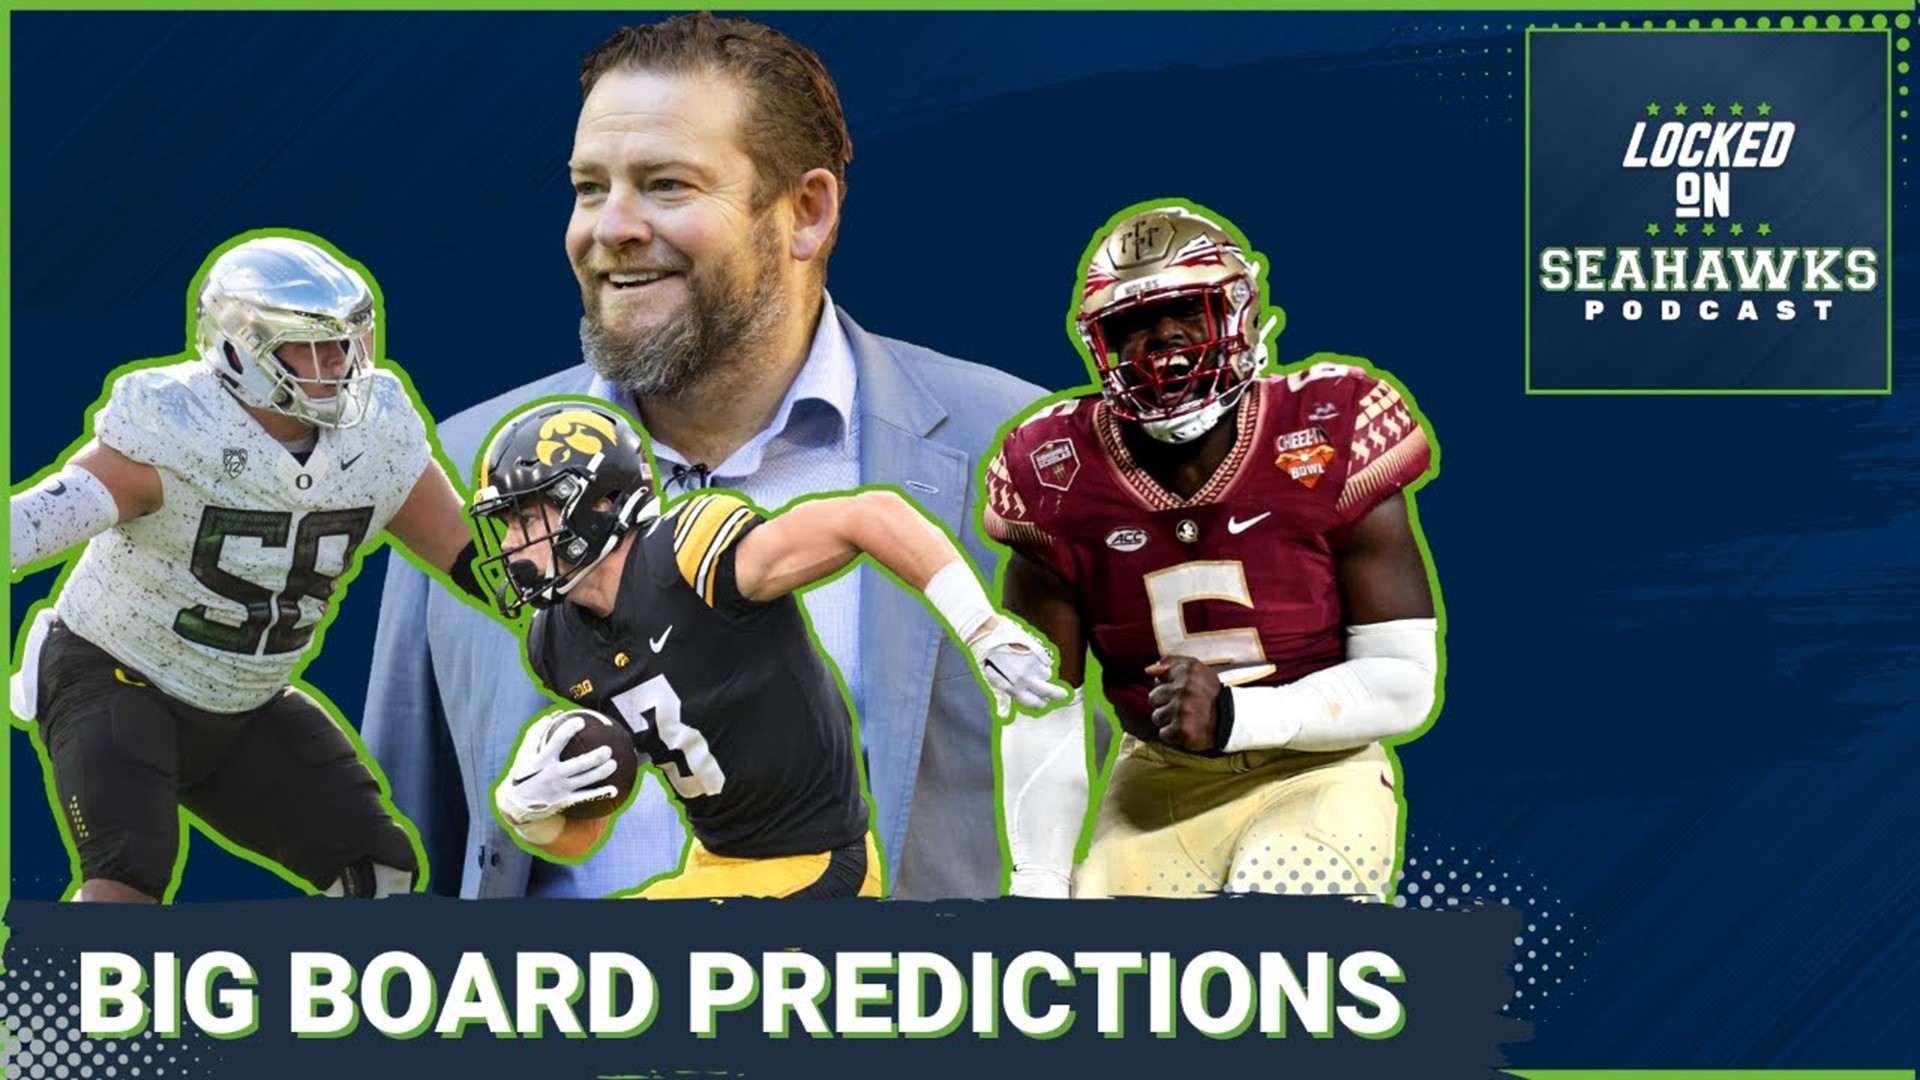 Even with the NFL Draft less than two weeks away, general managers such as John Schneider are still putting together their big board while wrapping up evaluations